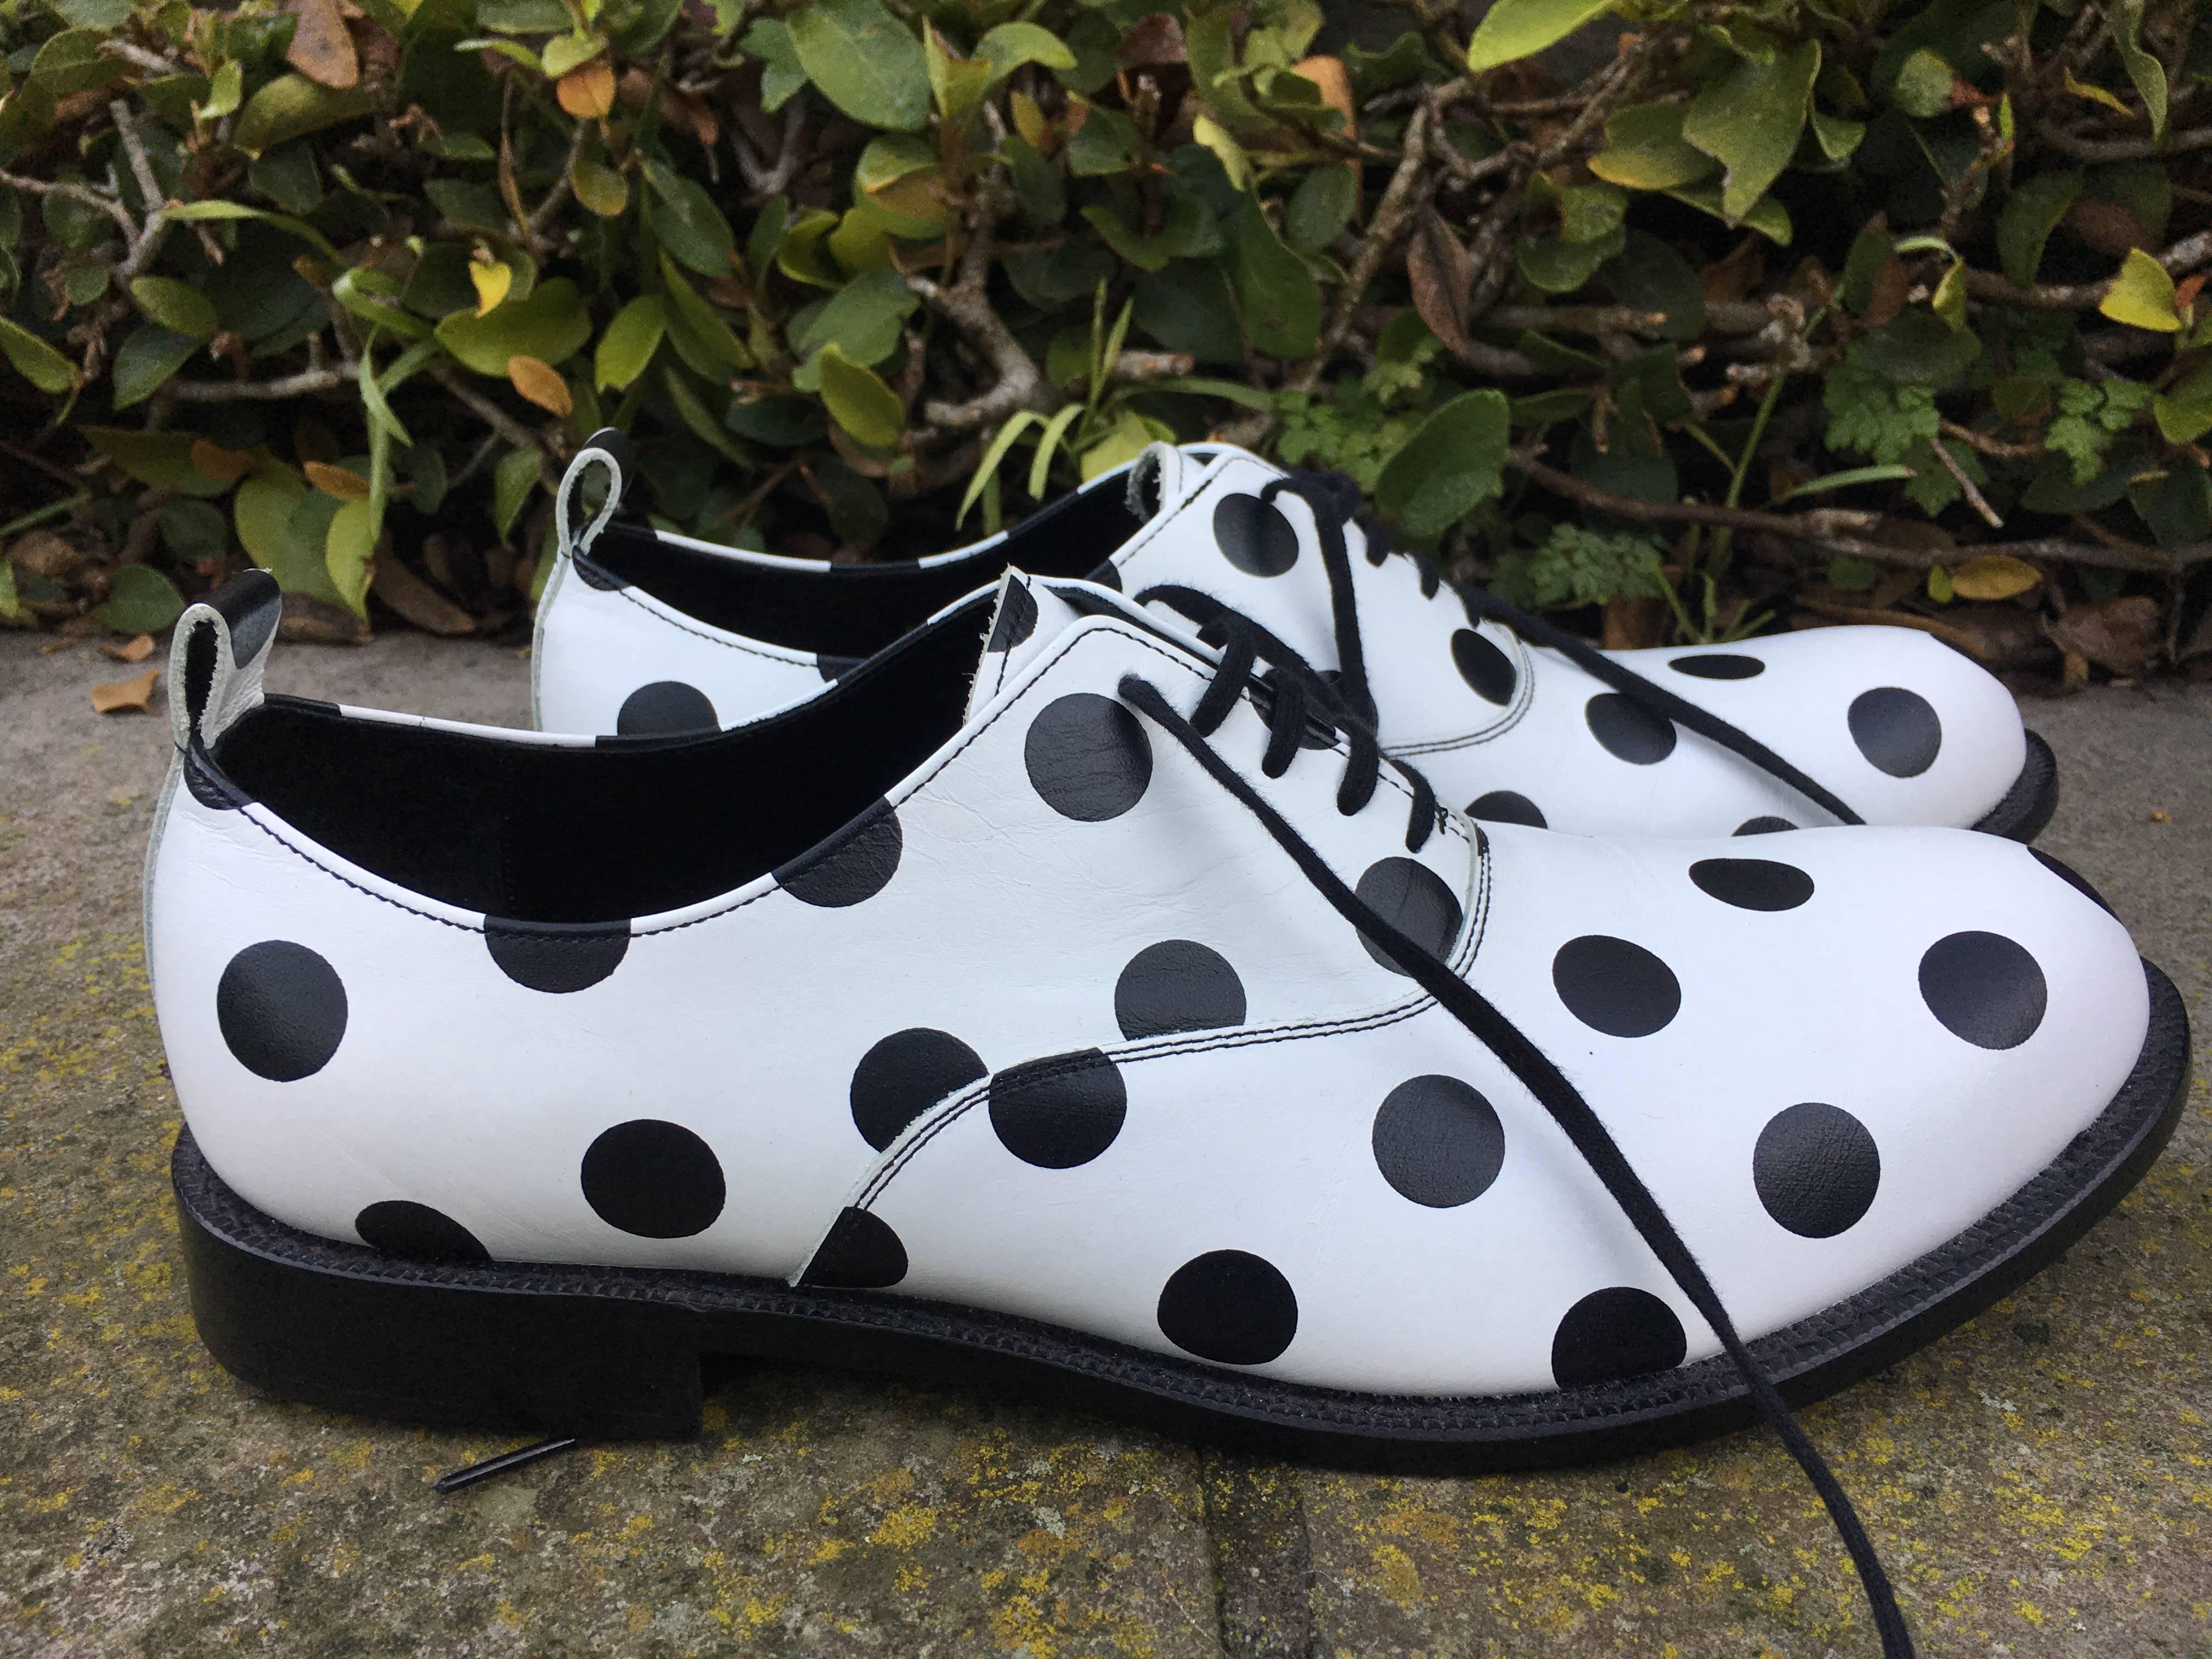 Wonderful white lace up brogues with black polka dots from Comme des Garcons Spring 2016.
Marked size 27 Japanese , these fit US size 9 1/2-10
Excellent pre owned condition